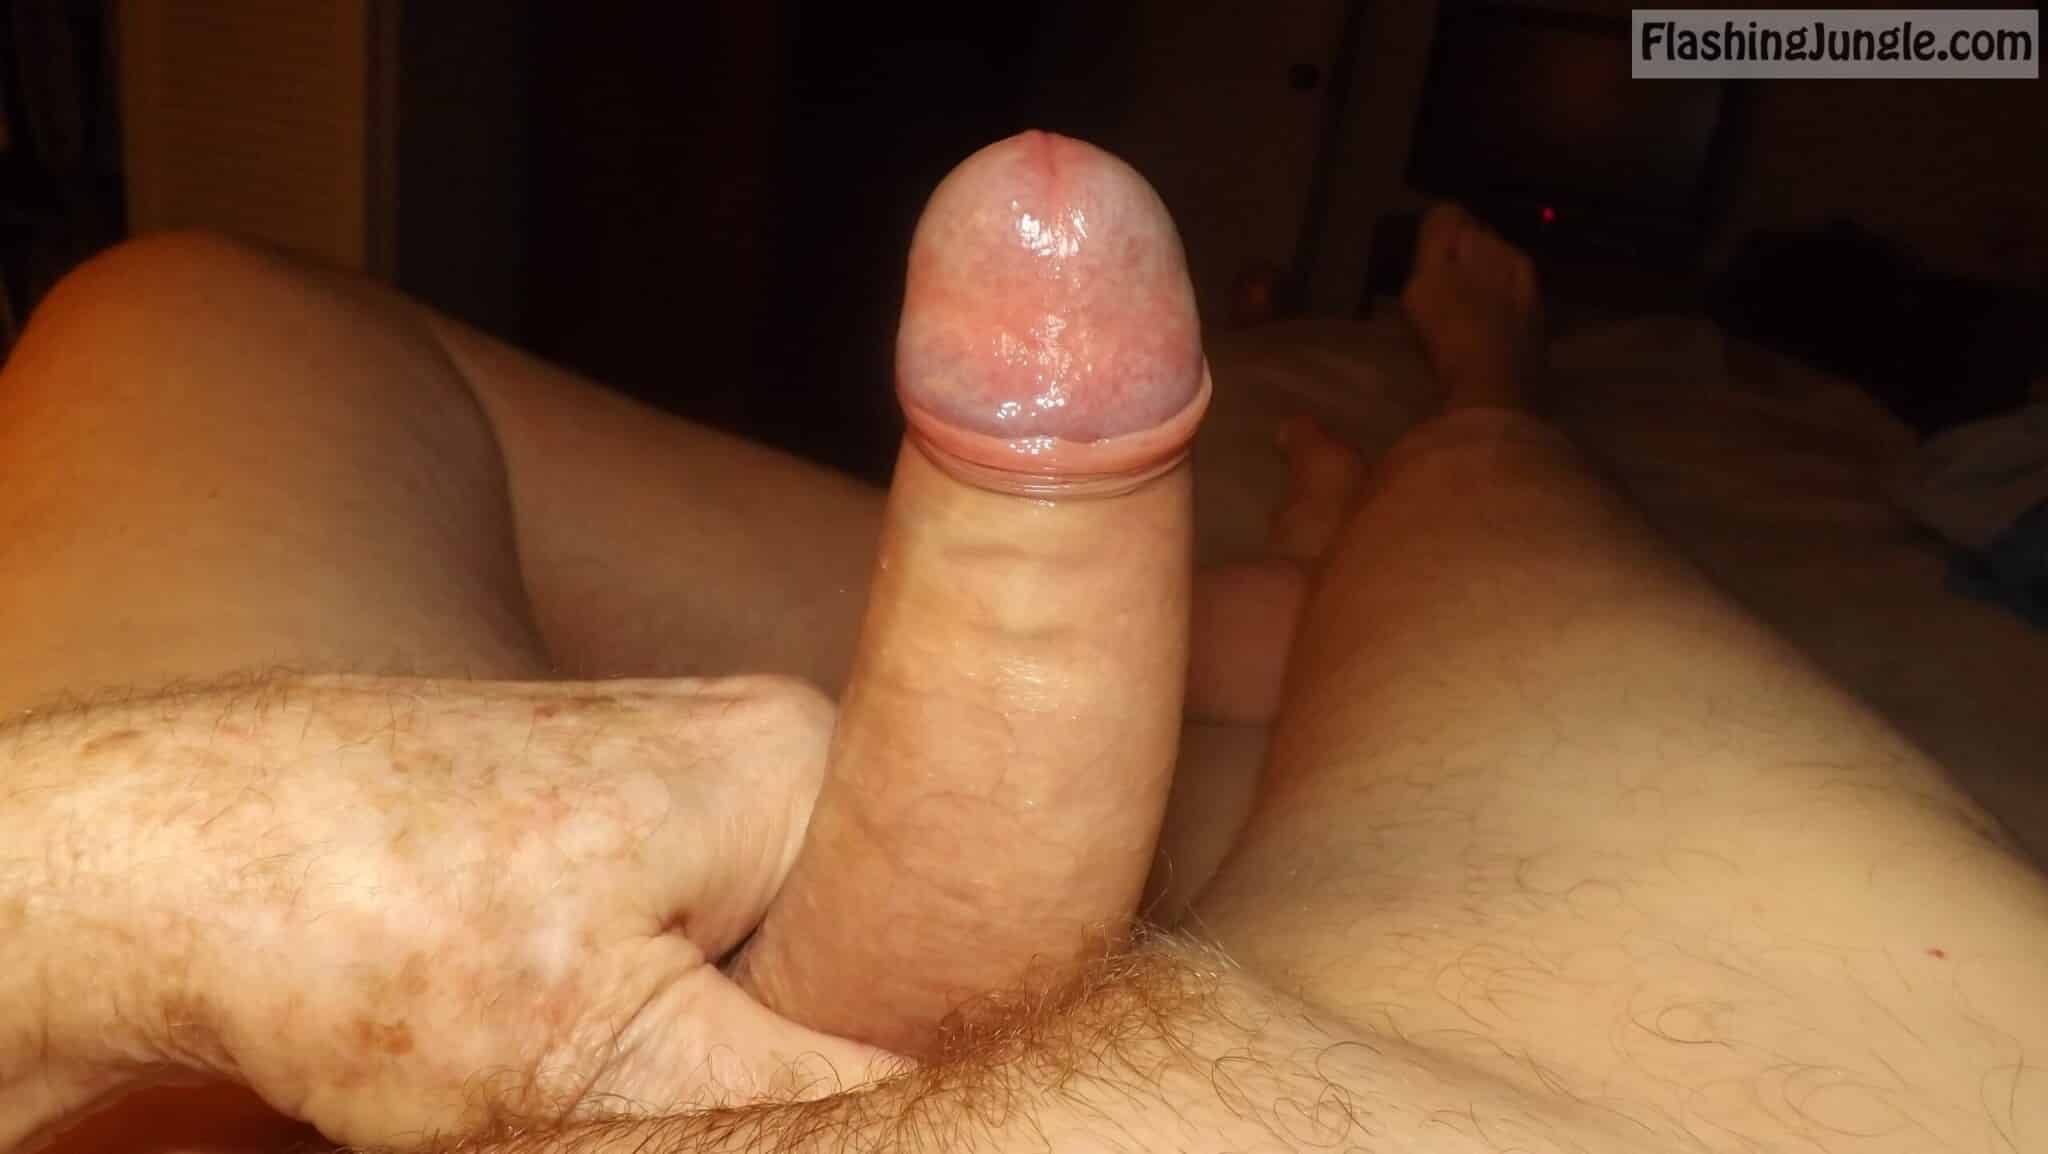 mum flash pussy pic - Old Dick1 Old Dick ready to go, just looking for pussy. - Dick Flash Pics